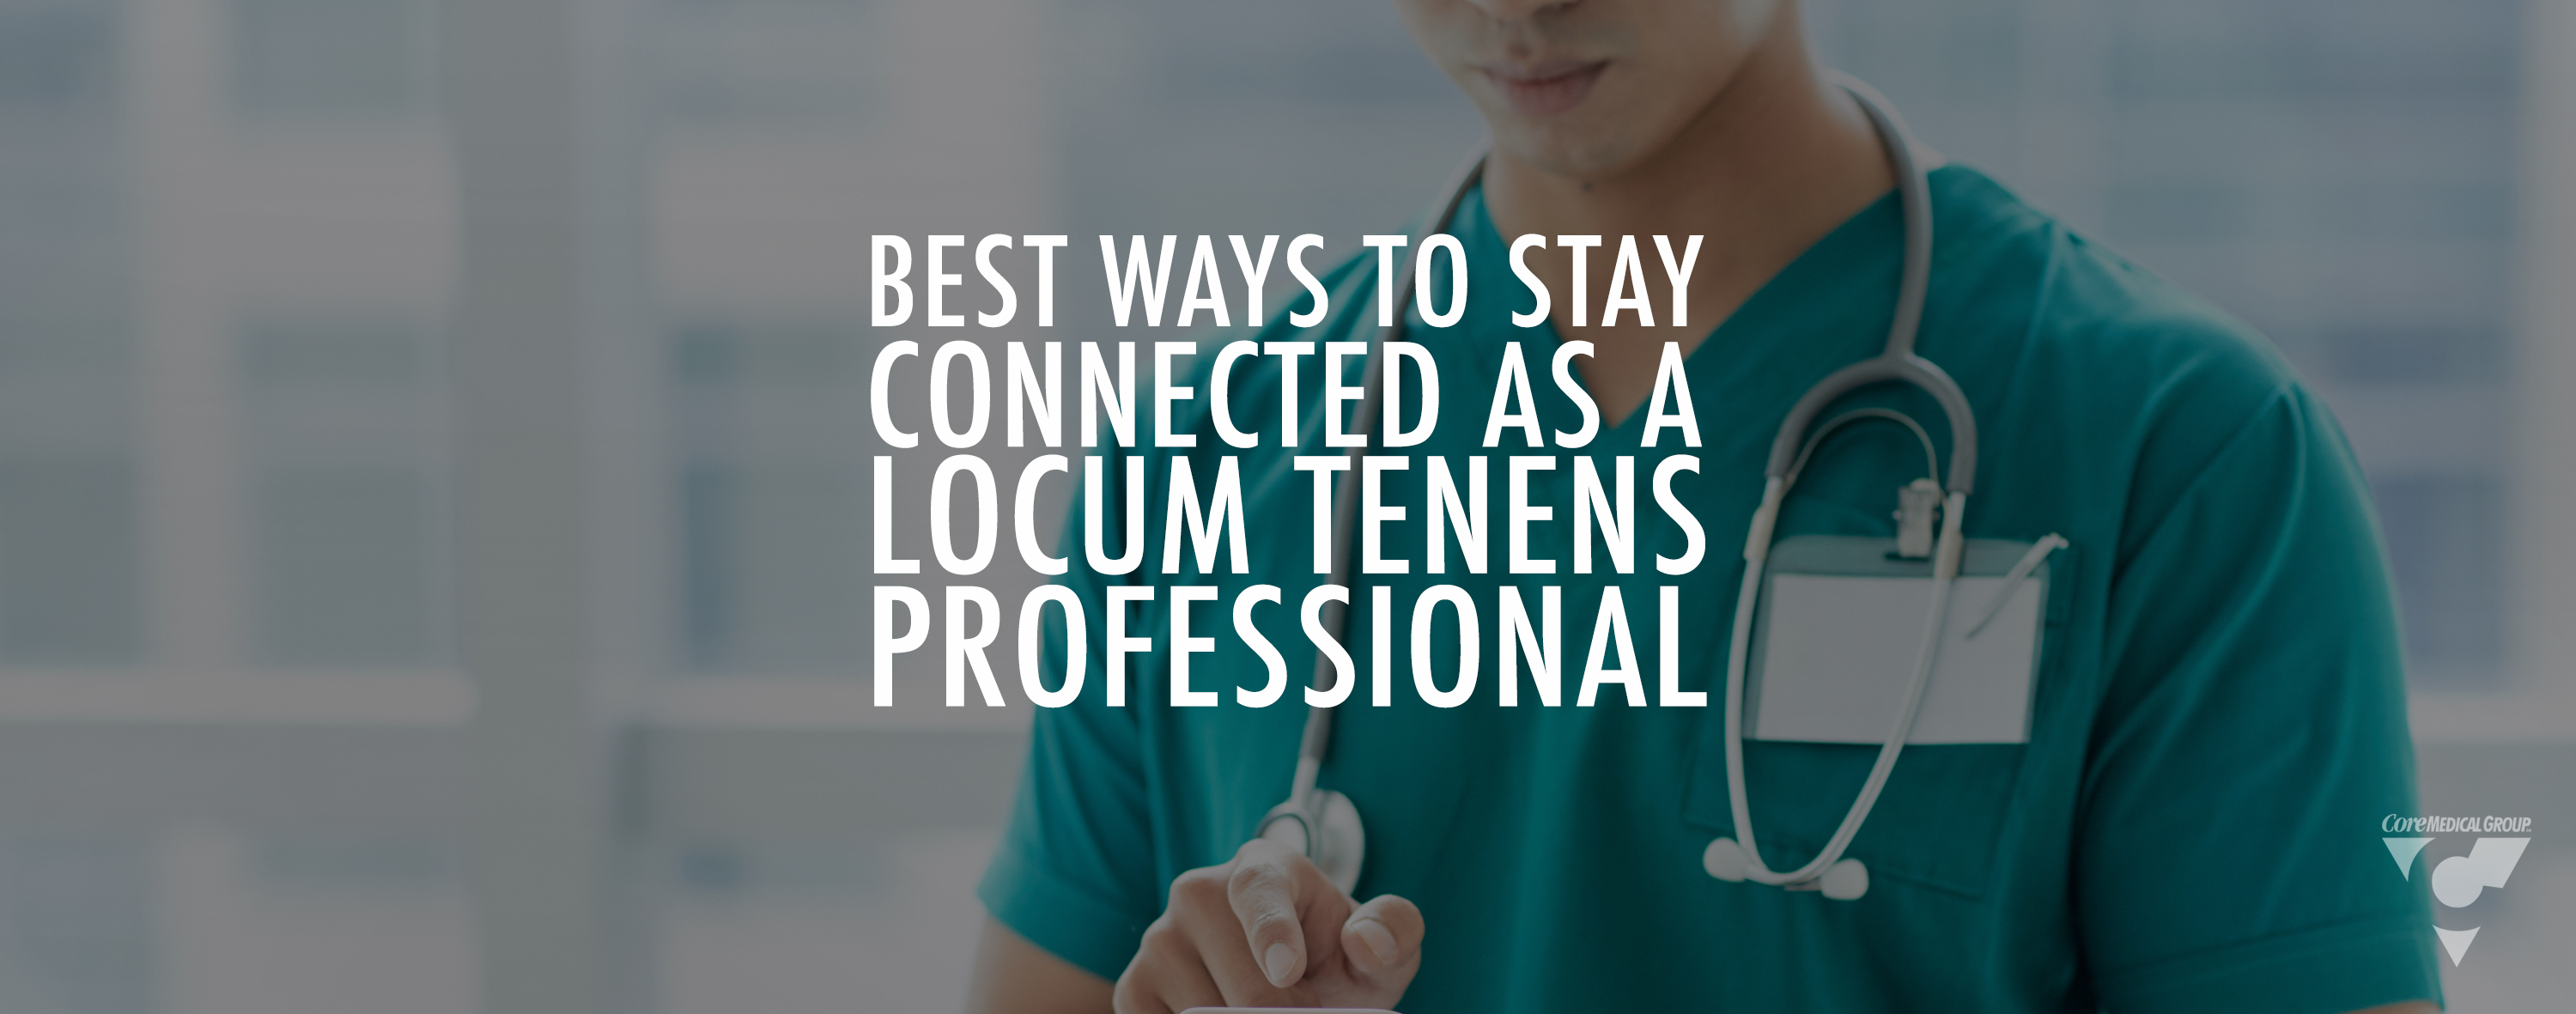 Best Ways to Stay Connected as a Locum Tenens Professional